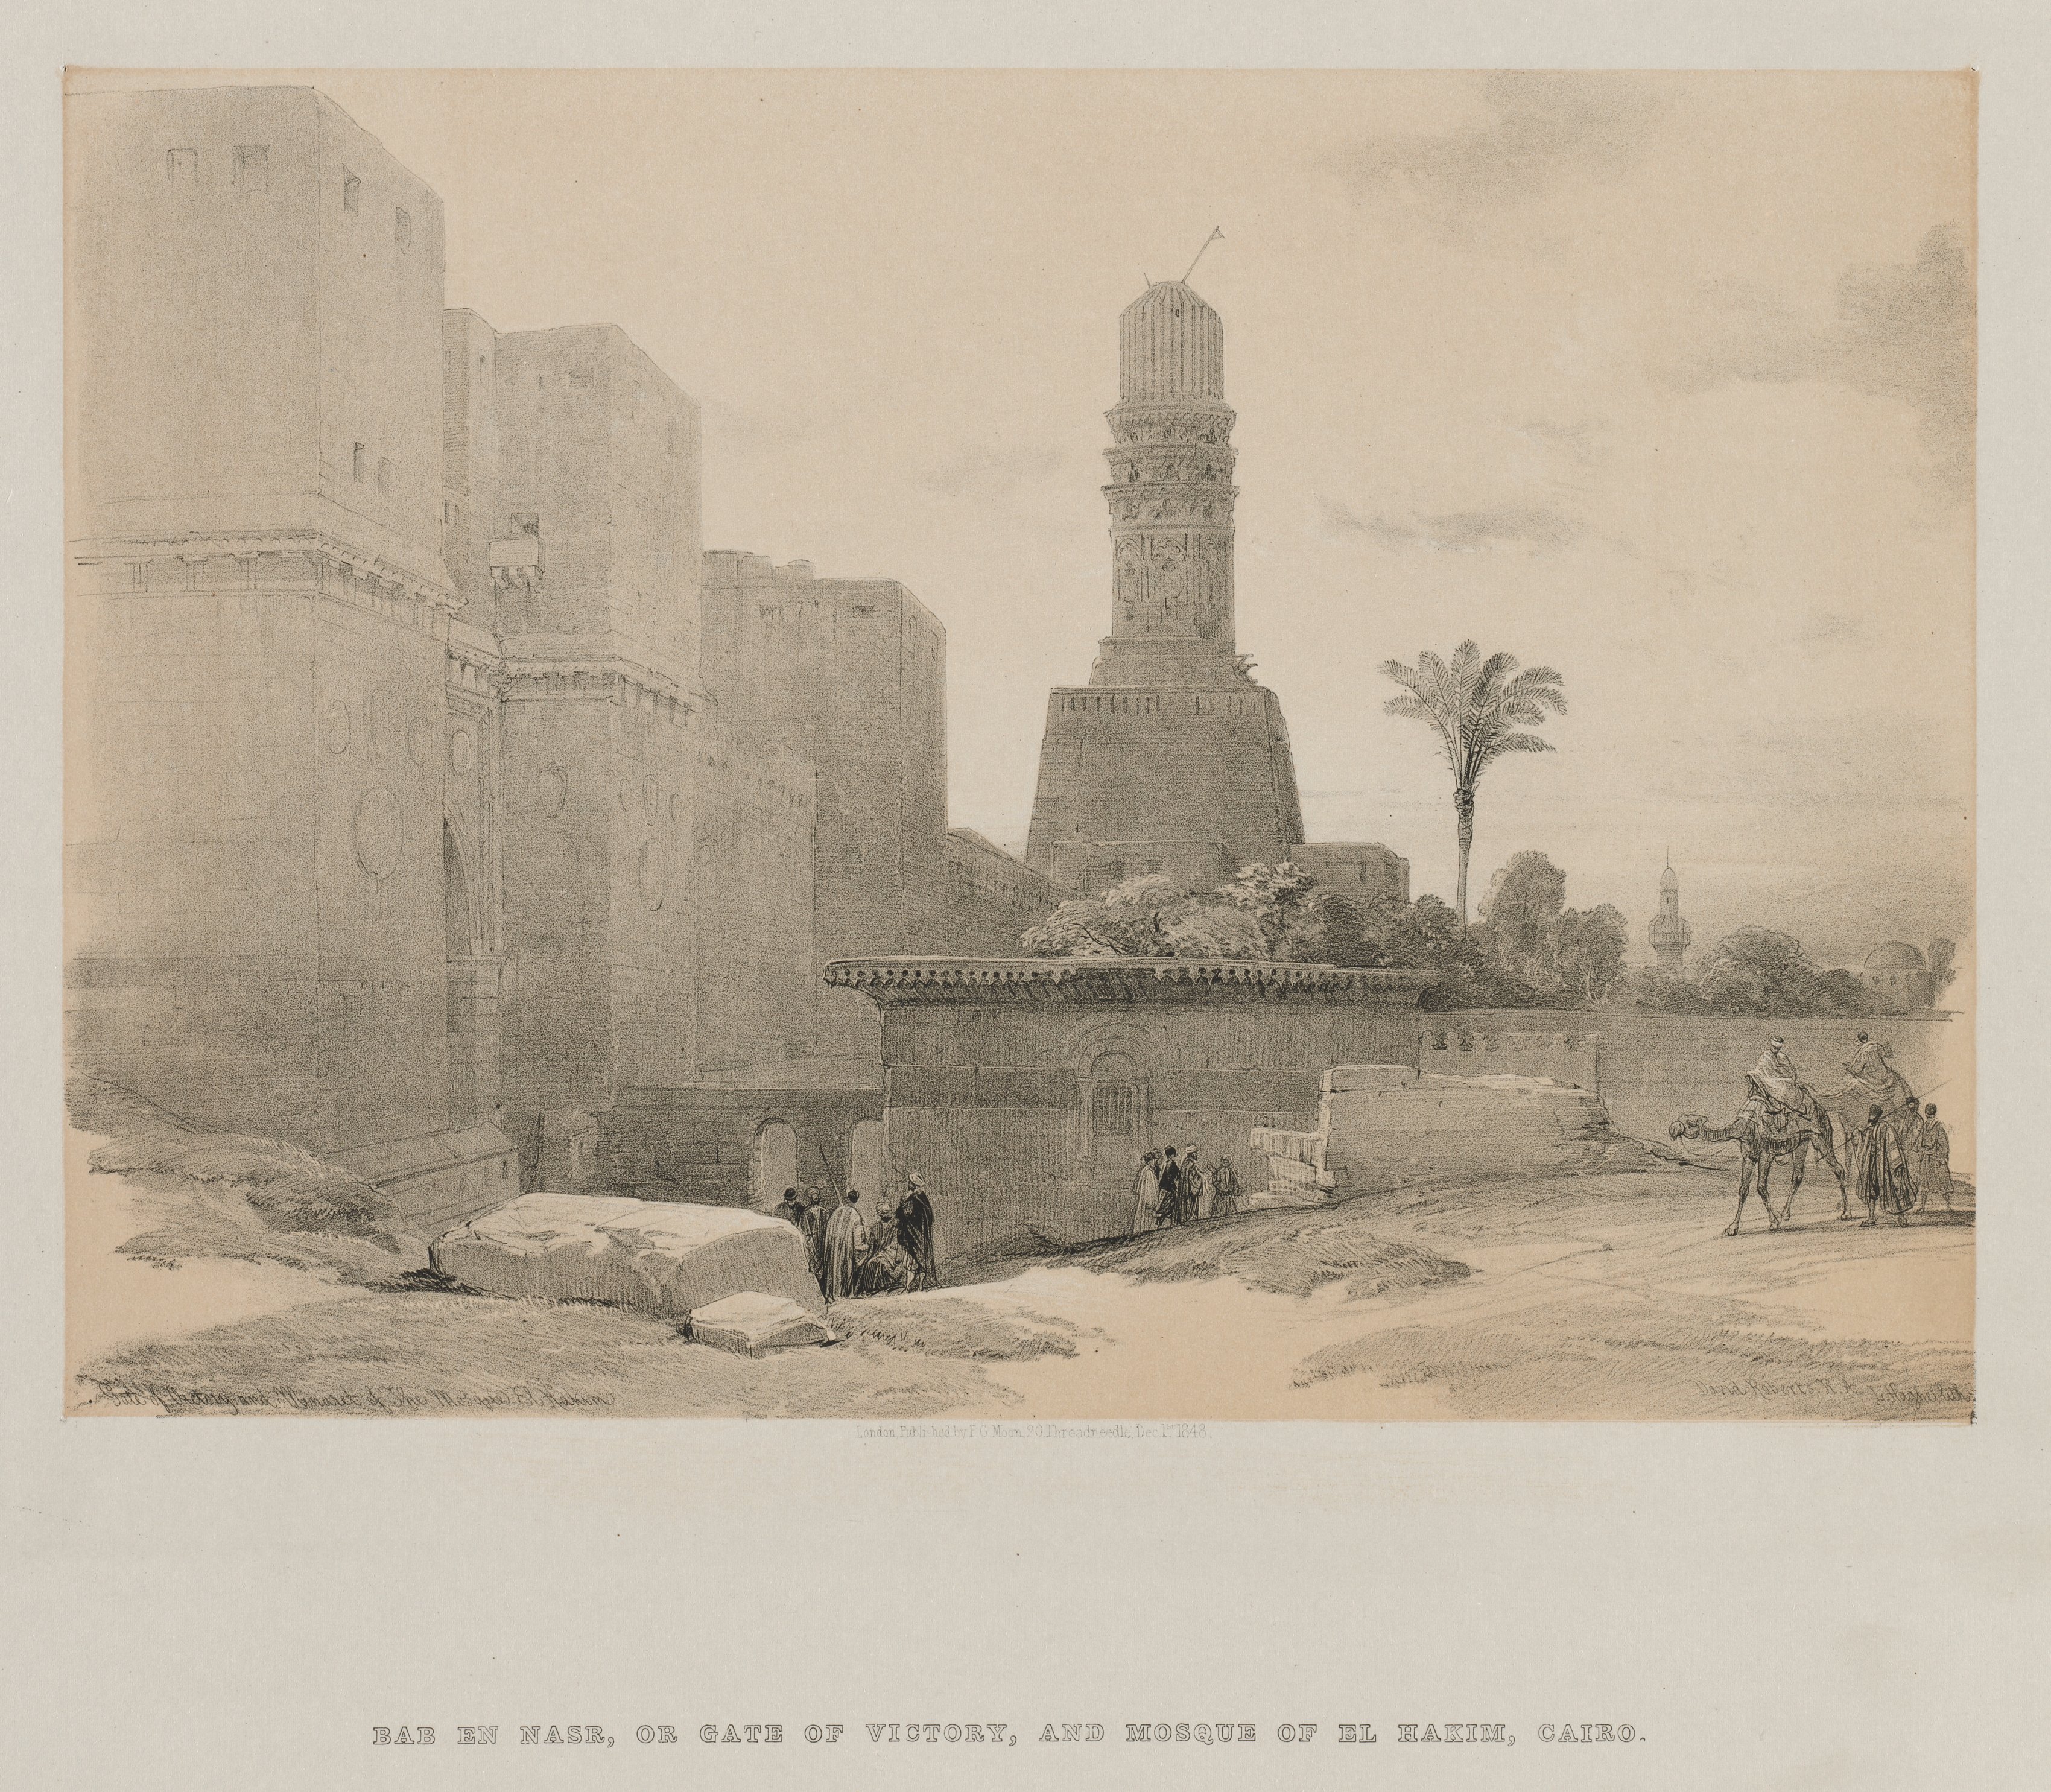 Egypt and Nubia, Volume III: Gate of Victory and Minaret of the Mosque El Hakim